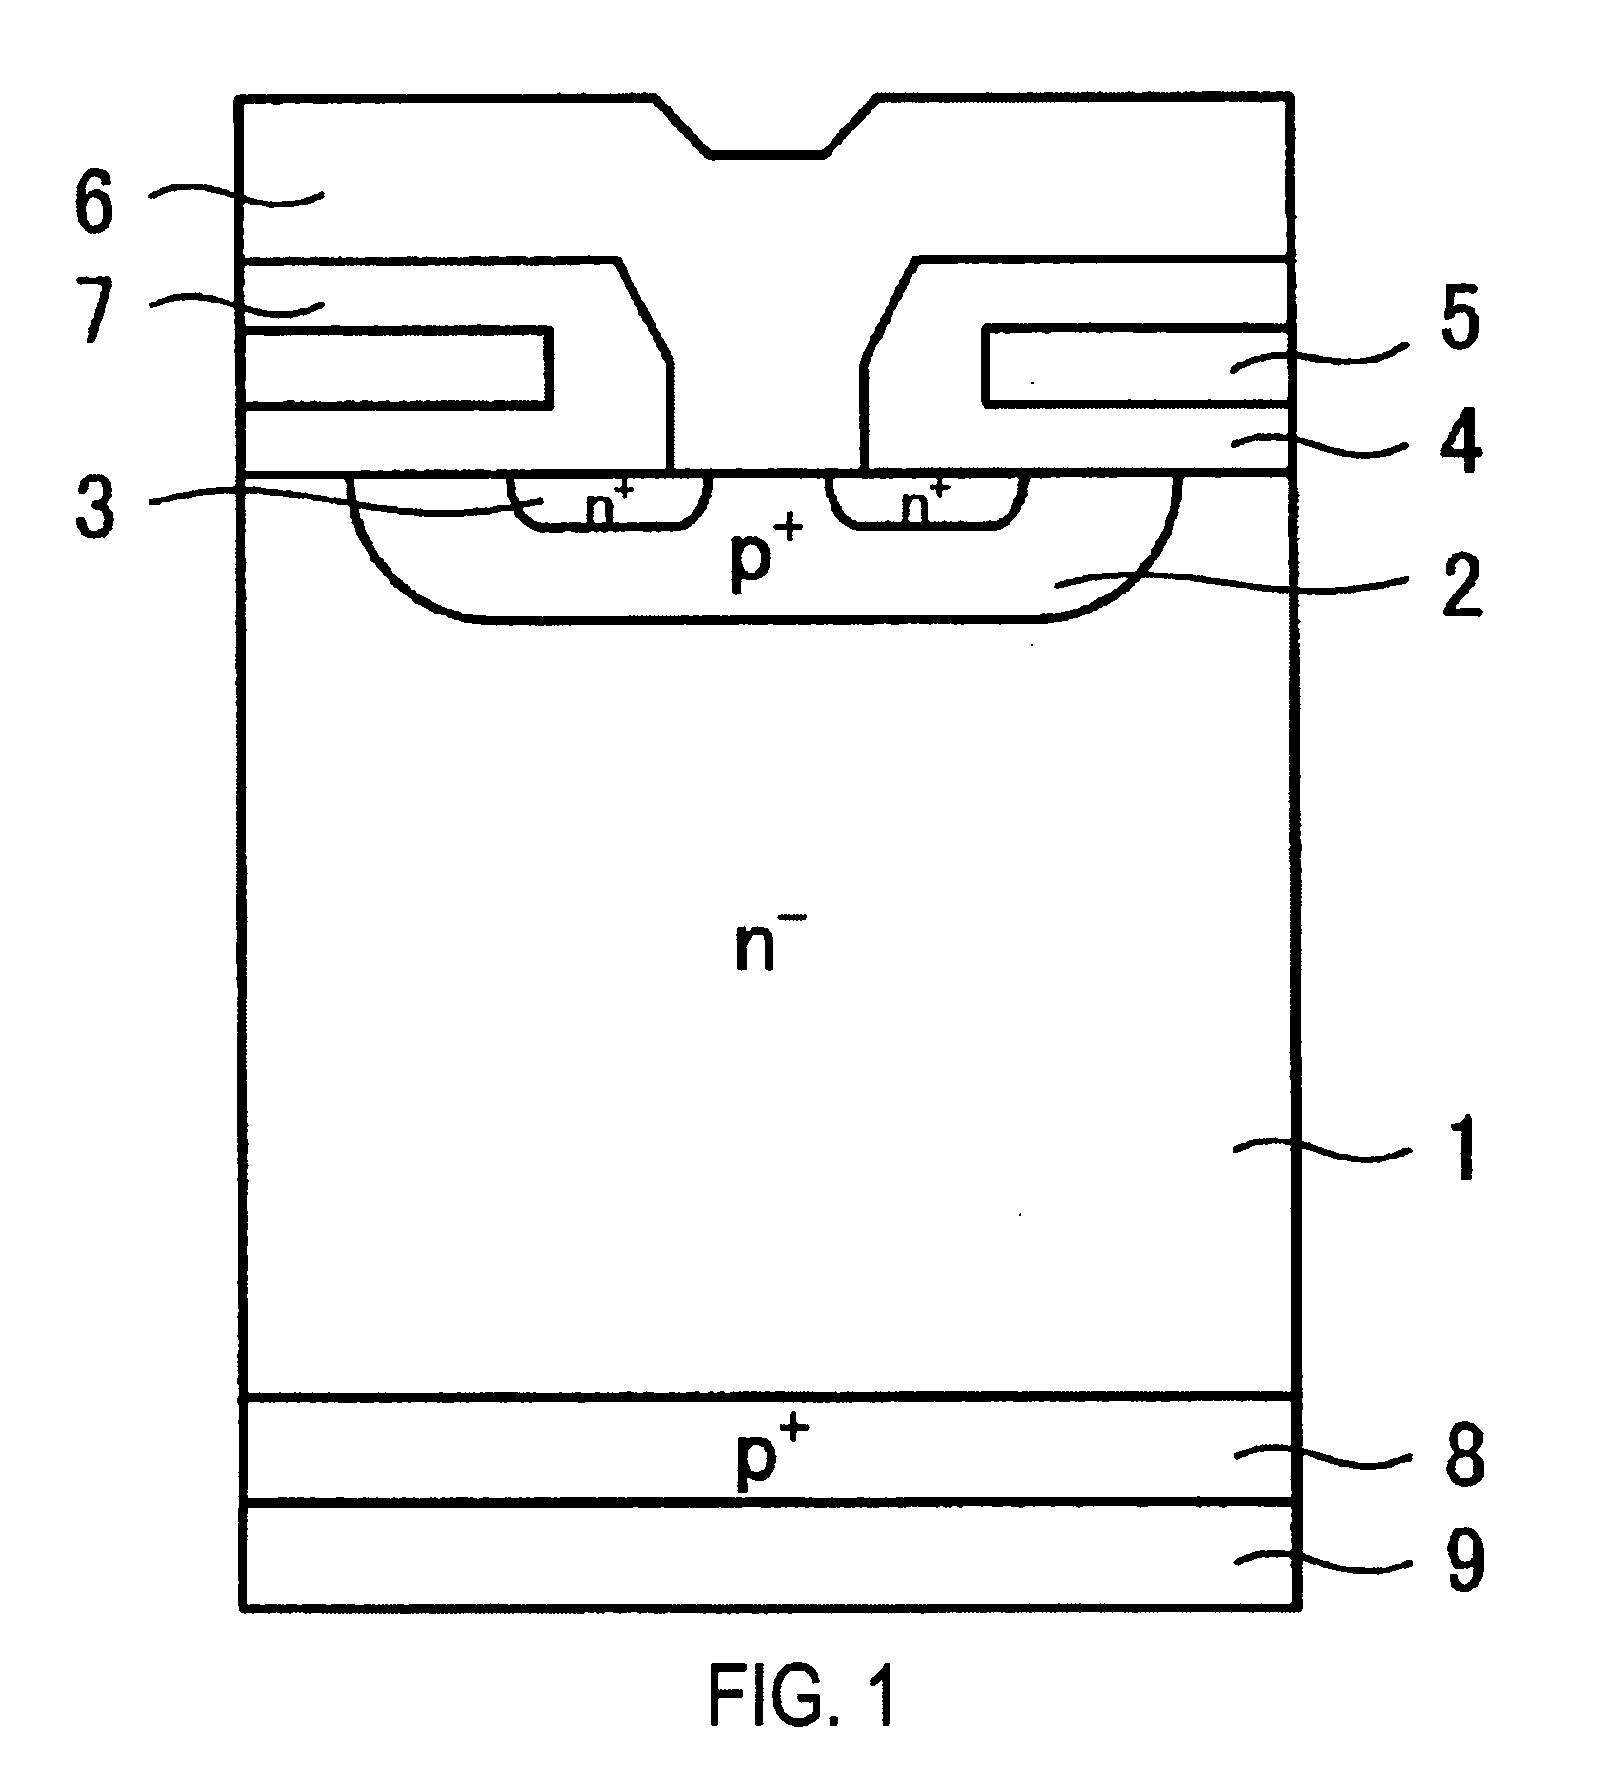 Method of producing a semiconductor device with an aluminum or aluminum alloy electrode